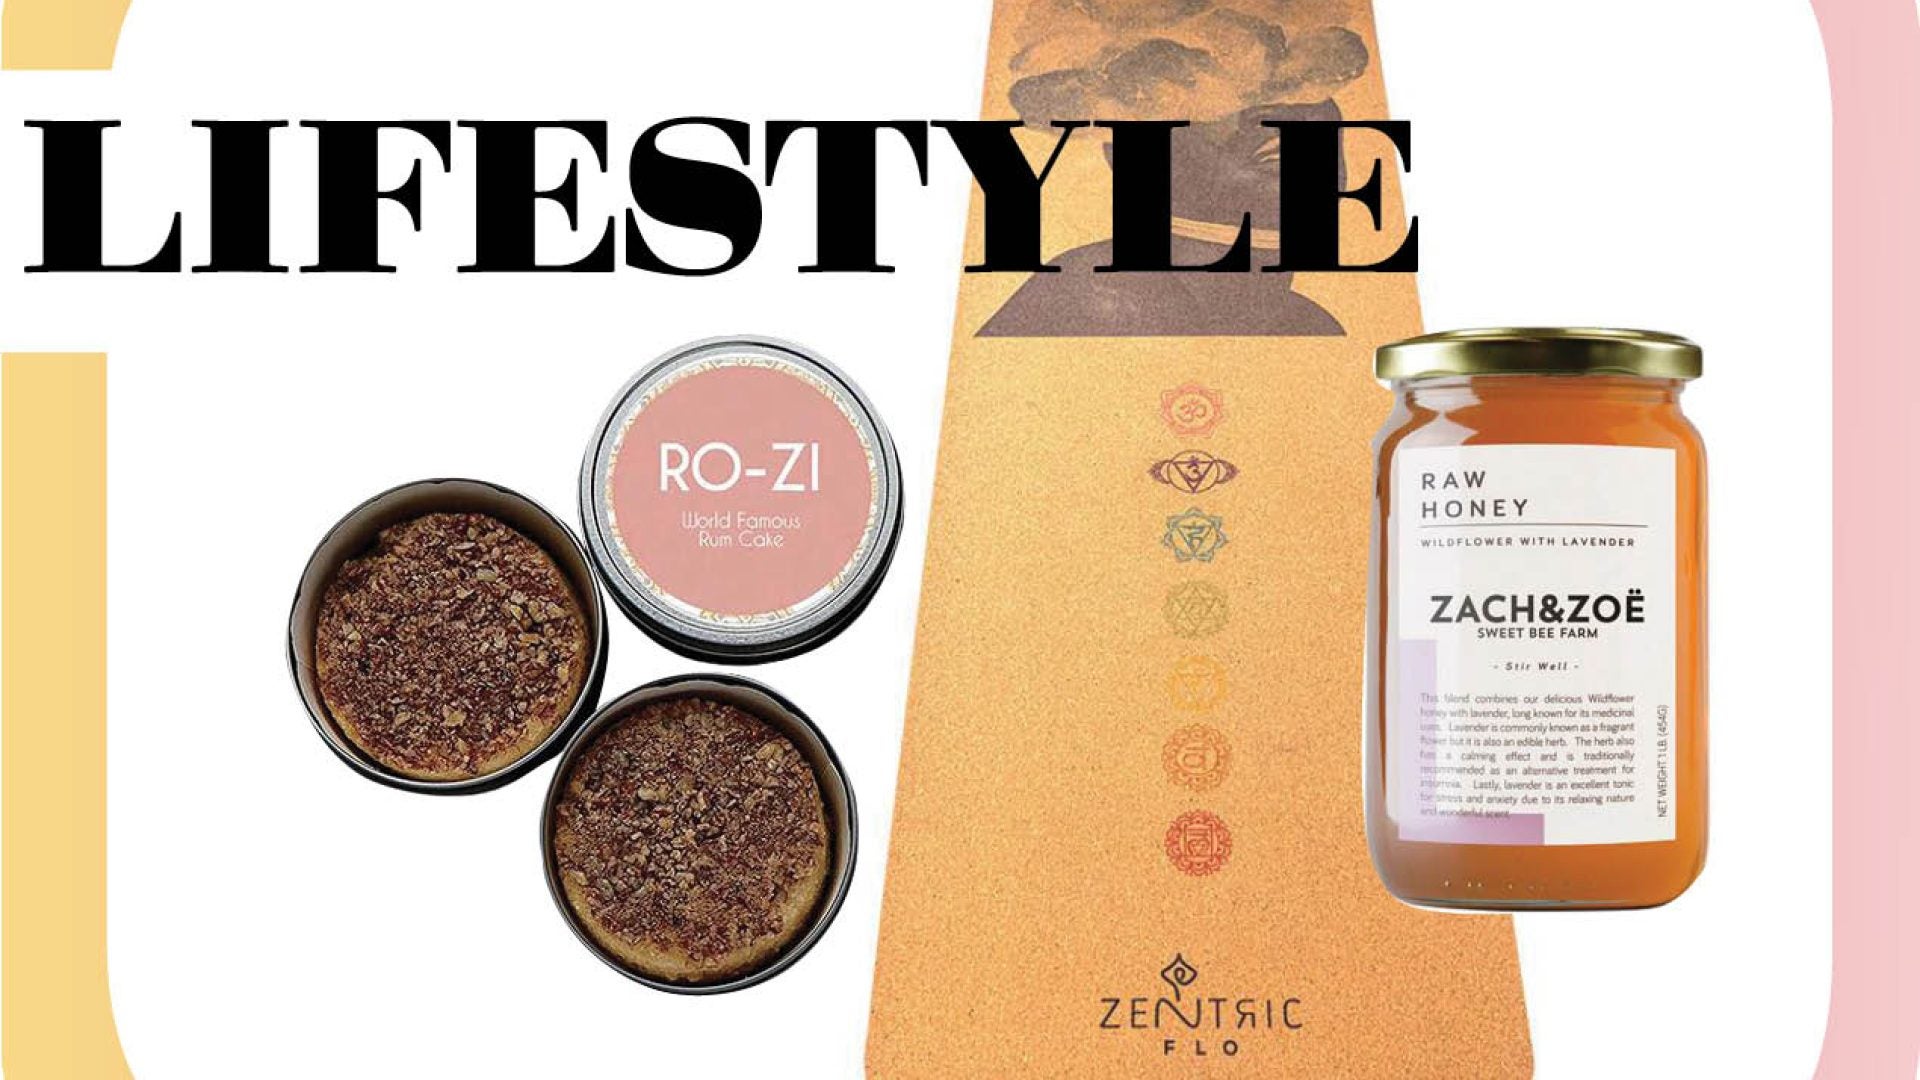 ESSENCE Best In Black Buys 2021: Lifestyle Gift Ideas They’ll Love